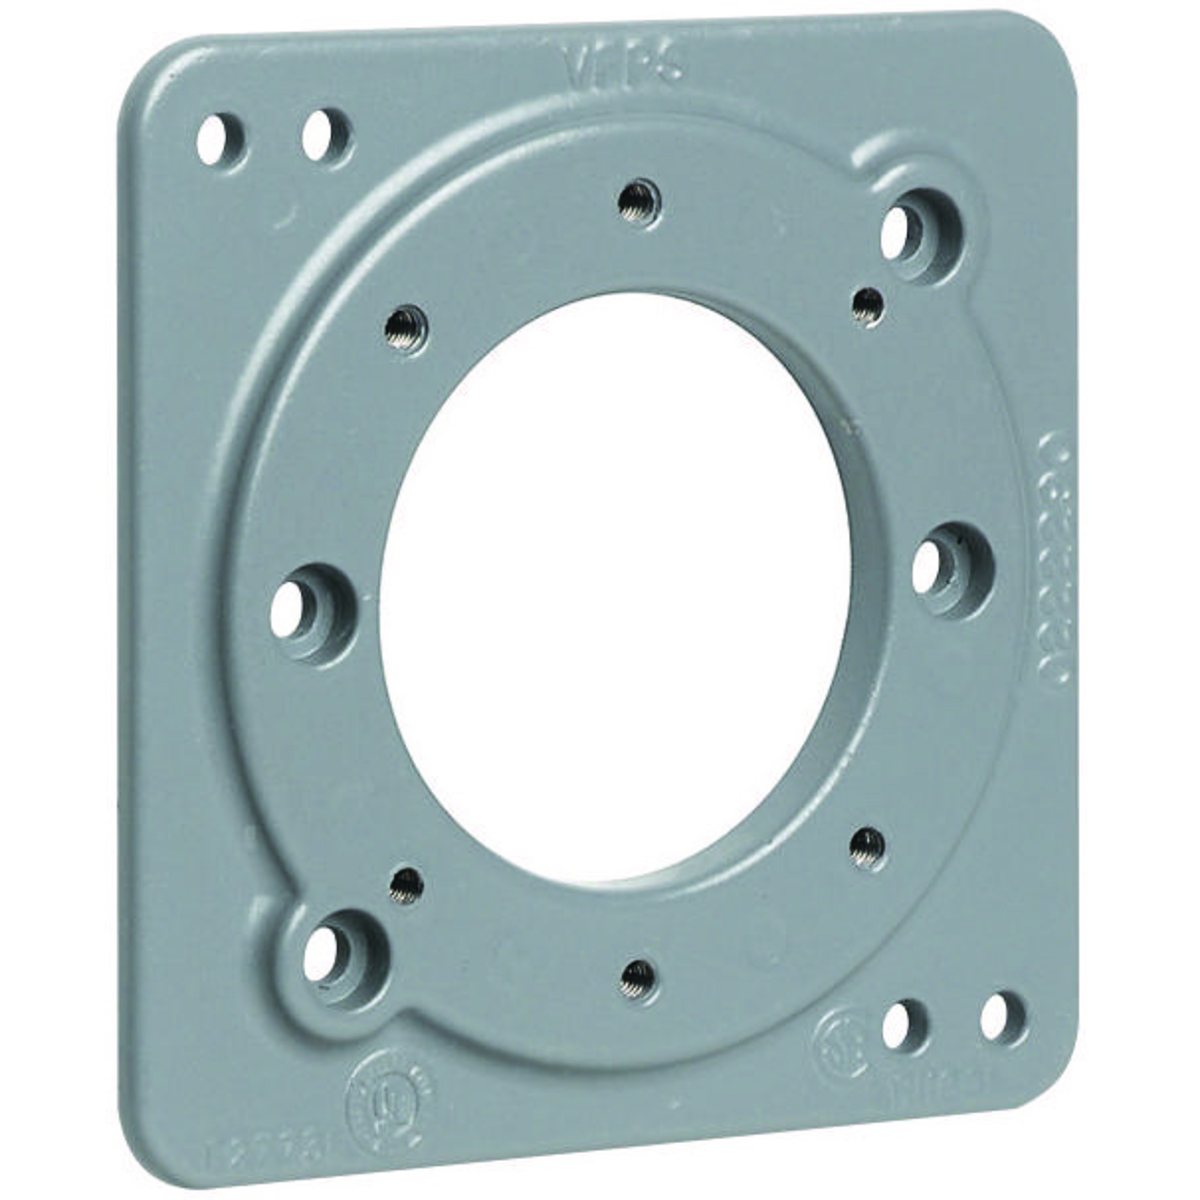 V SERIES - V ADAPTER MOUNTING PLATE - ADAPTS FIXTURE BODY TO STEEL 4 INSQUARE OUTLET BOXES OR 3-1/2 IN OR 4 IN OCTAGON BOXES